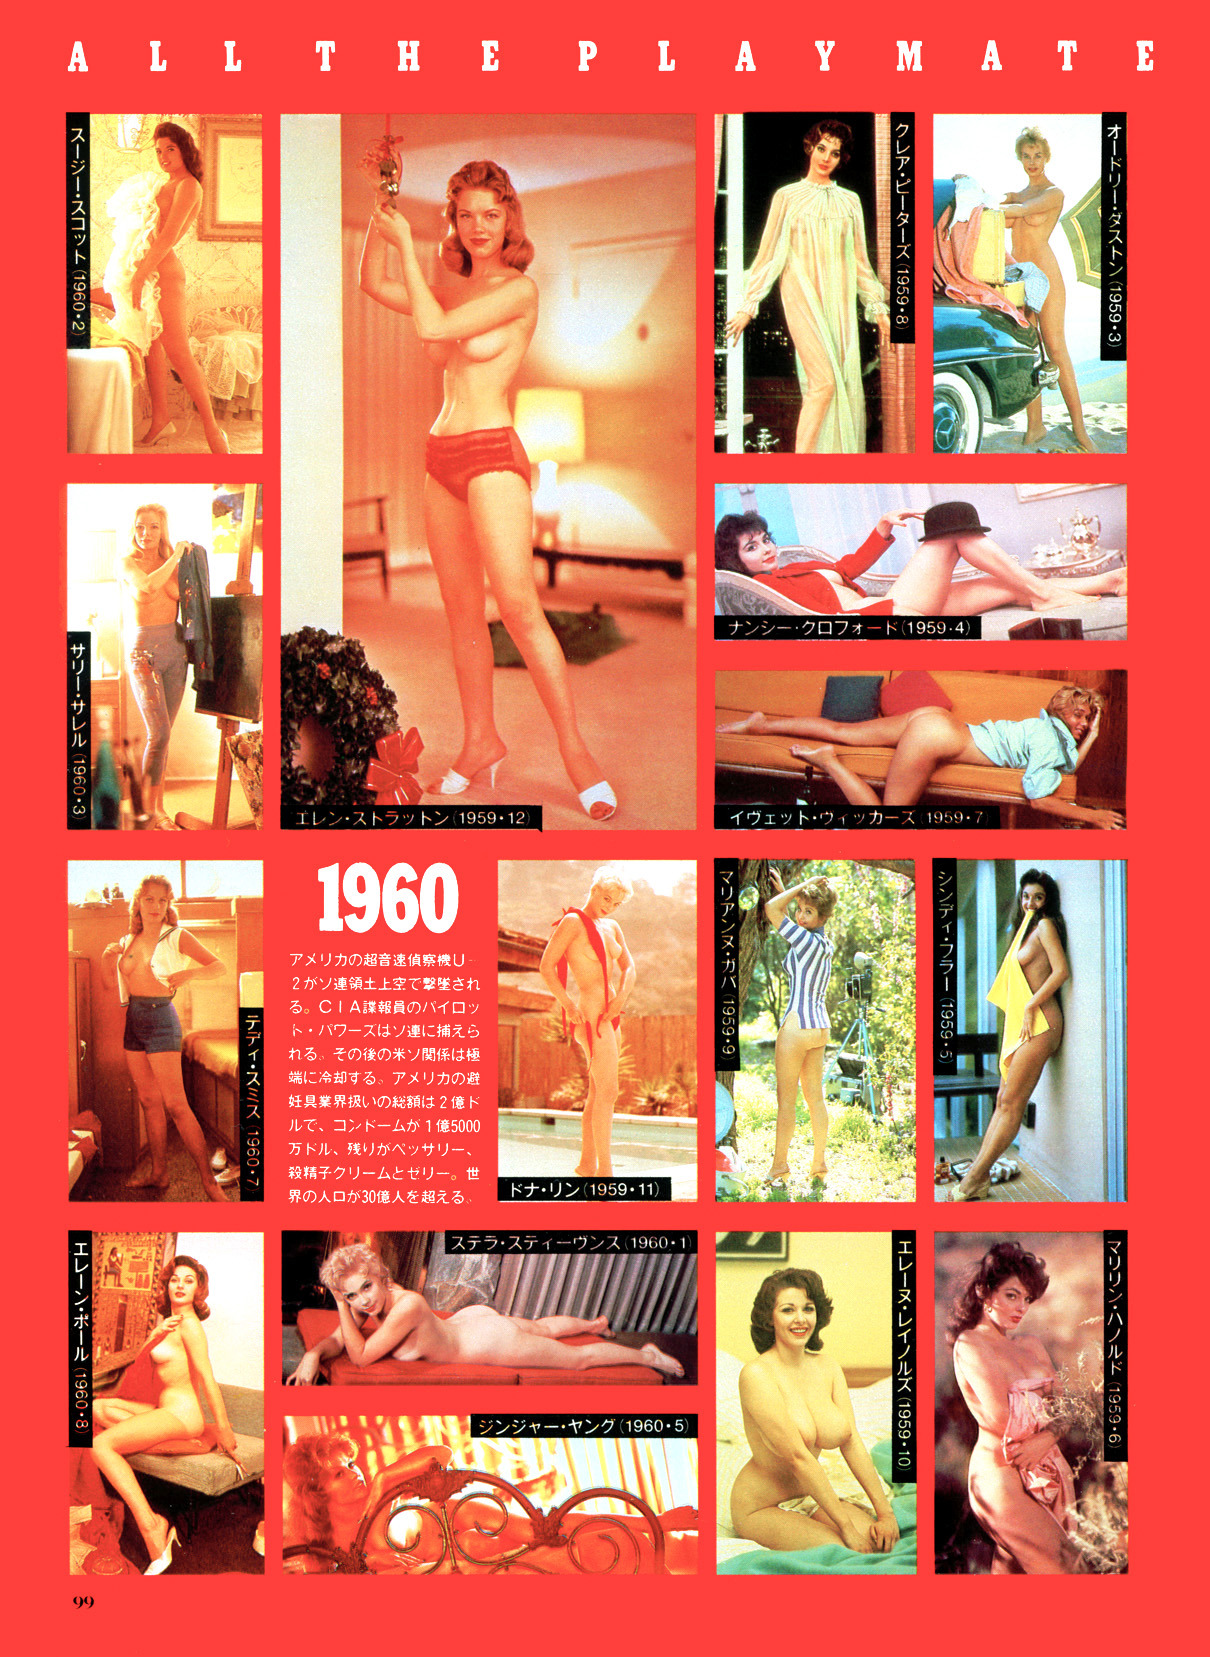 Japanese Playboy pictorial All the Playmates Go Marching On!